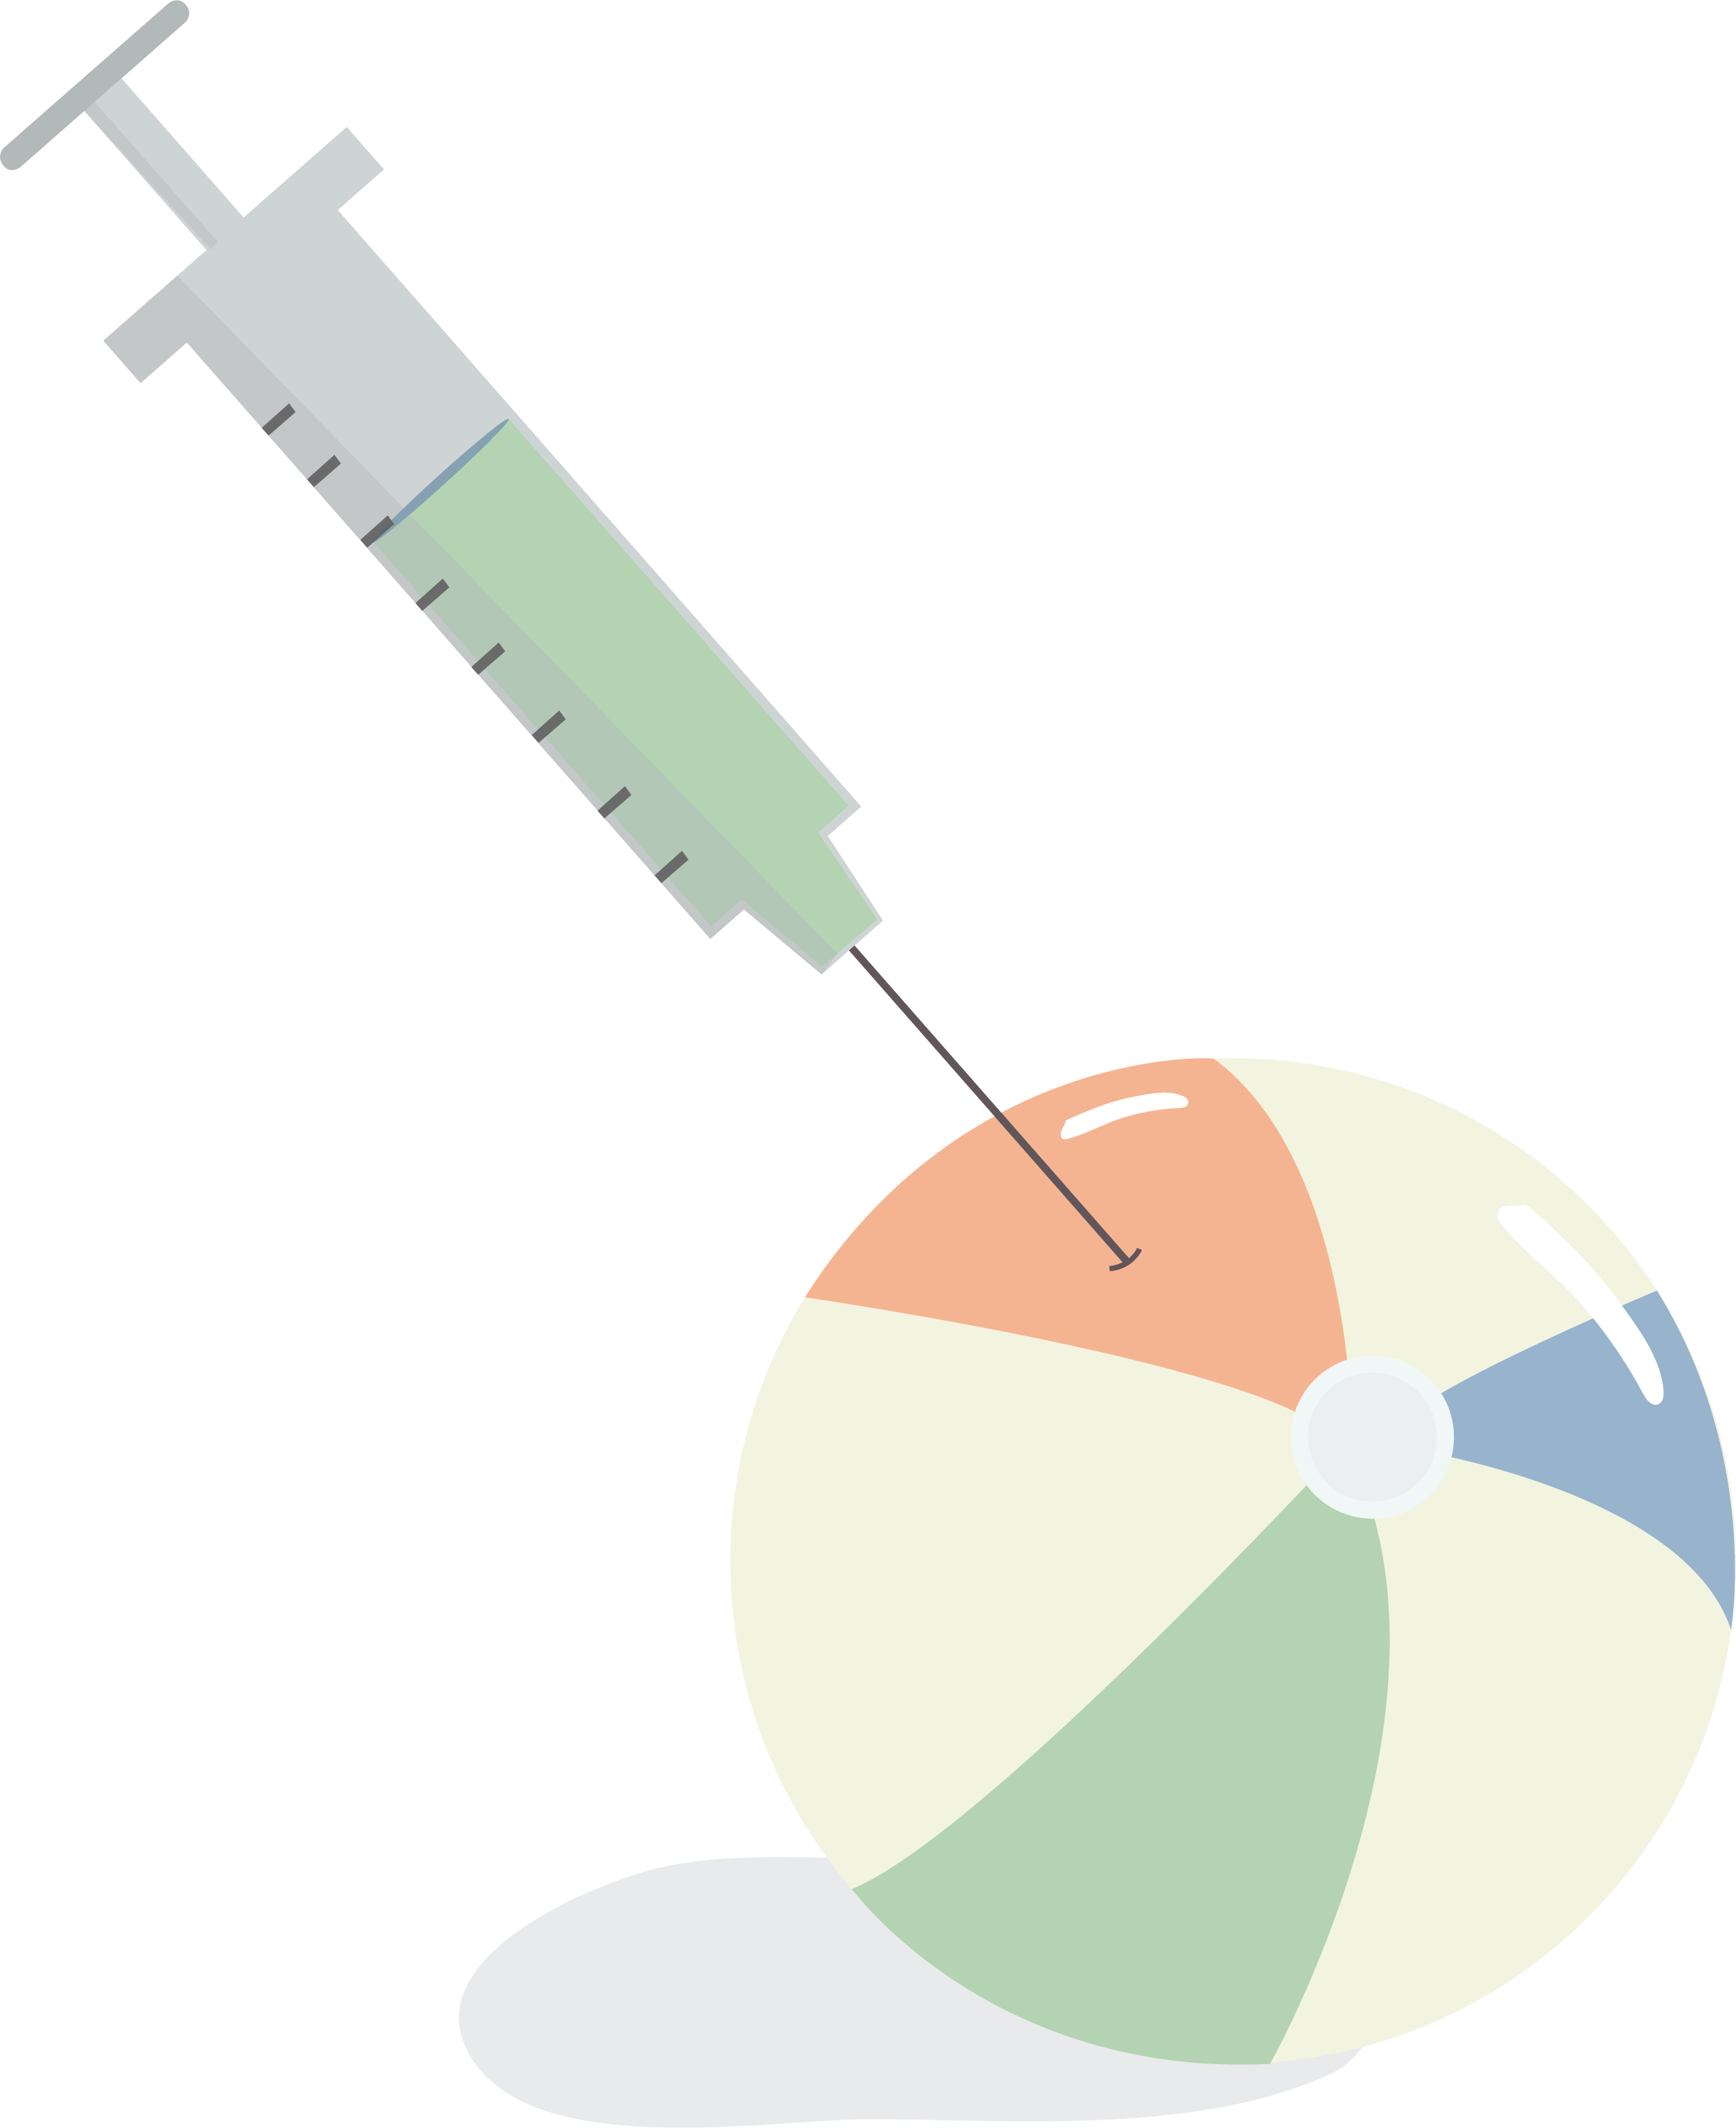 An illustration of an inflatable beach ball being filled by a vaccine sryinge